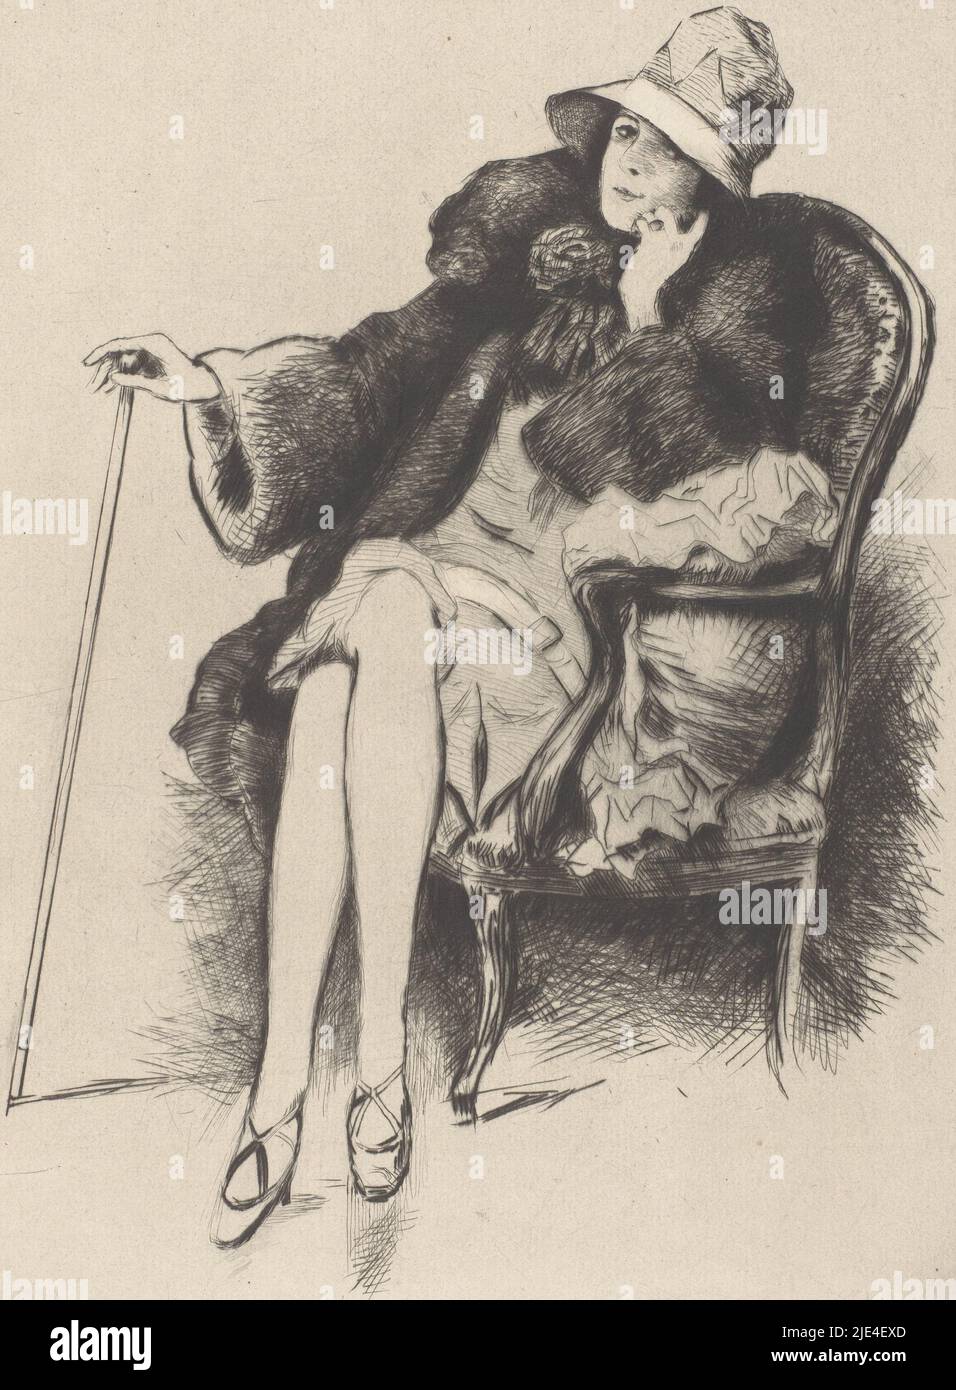 Woman with hat in armchair, Pierre Georges Jeanniot, 1920 - 1934, Young lady, seated in armchair, left hand under chin, right hand supporting a cane with knob. She is dressed in fur coat and short gown with low waist, on her feet shoes with heels and crossed straps. Pot hat with wide brim. Clothing 1920s-1930s., print maker: Pierre Georges Jeanniot, (signed by artist), France, 1920 - 1934, paper, drypoint, etching, engraving, h 299 mm × w 209 mm Stock Photo